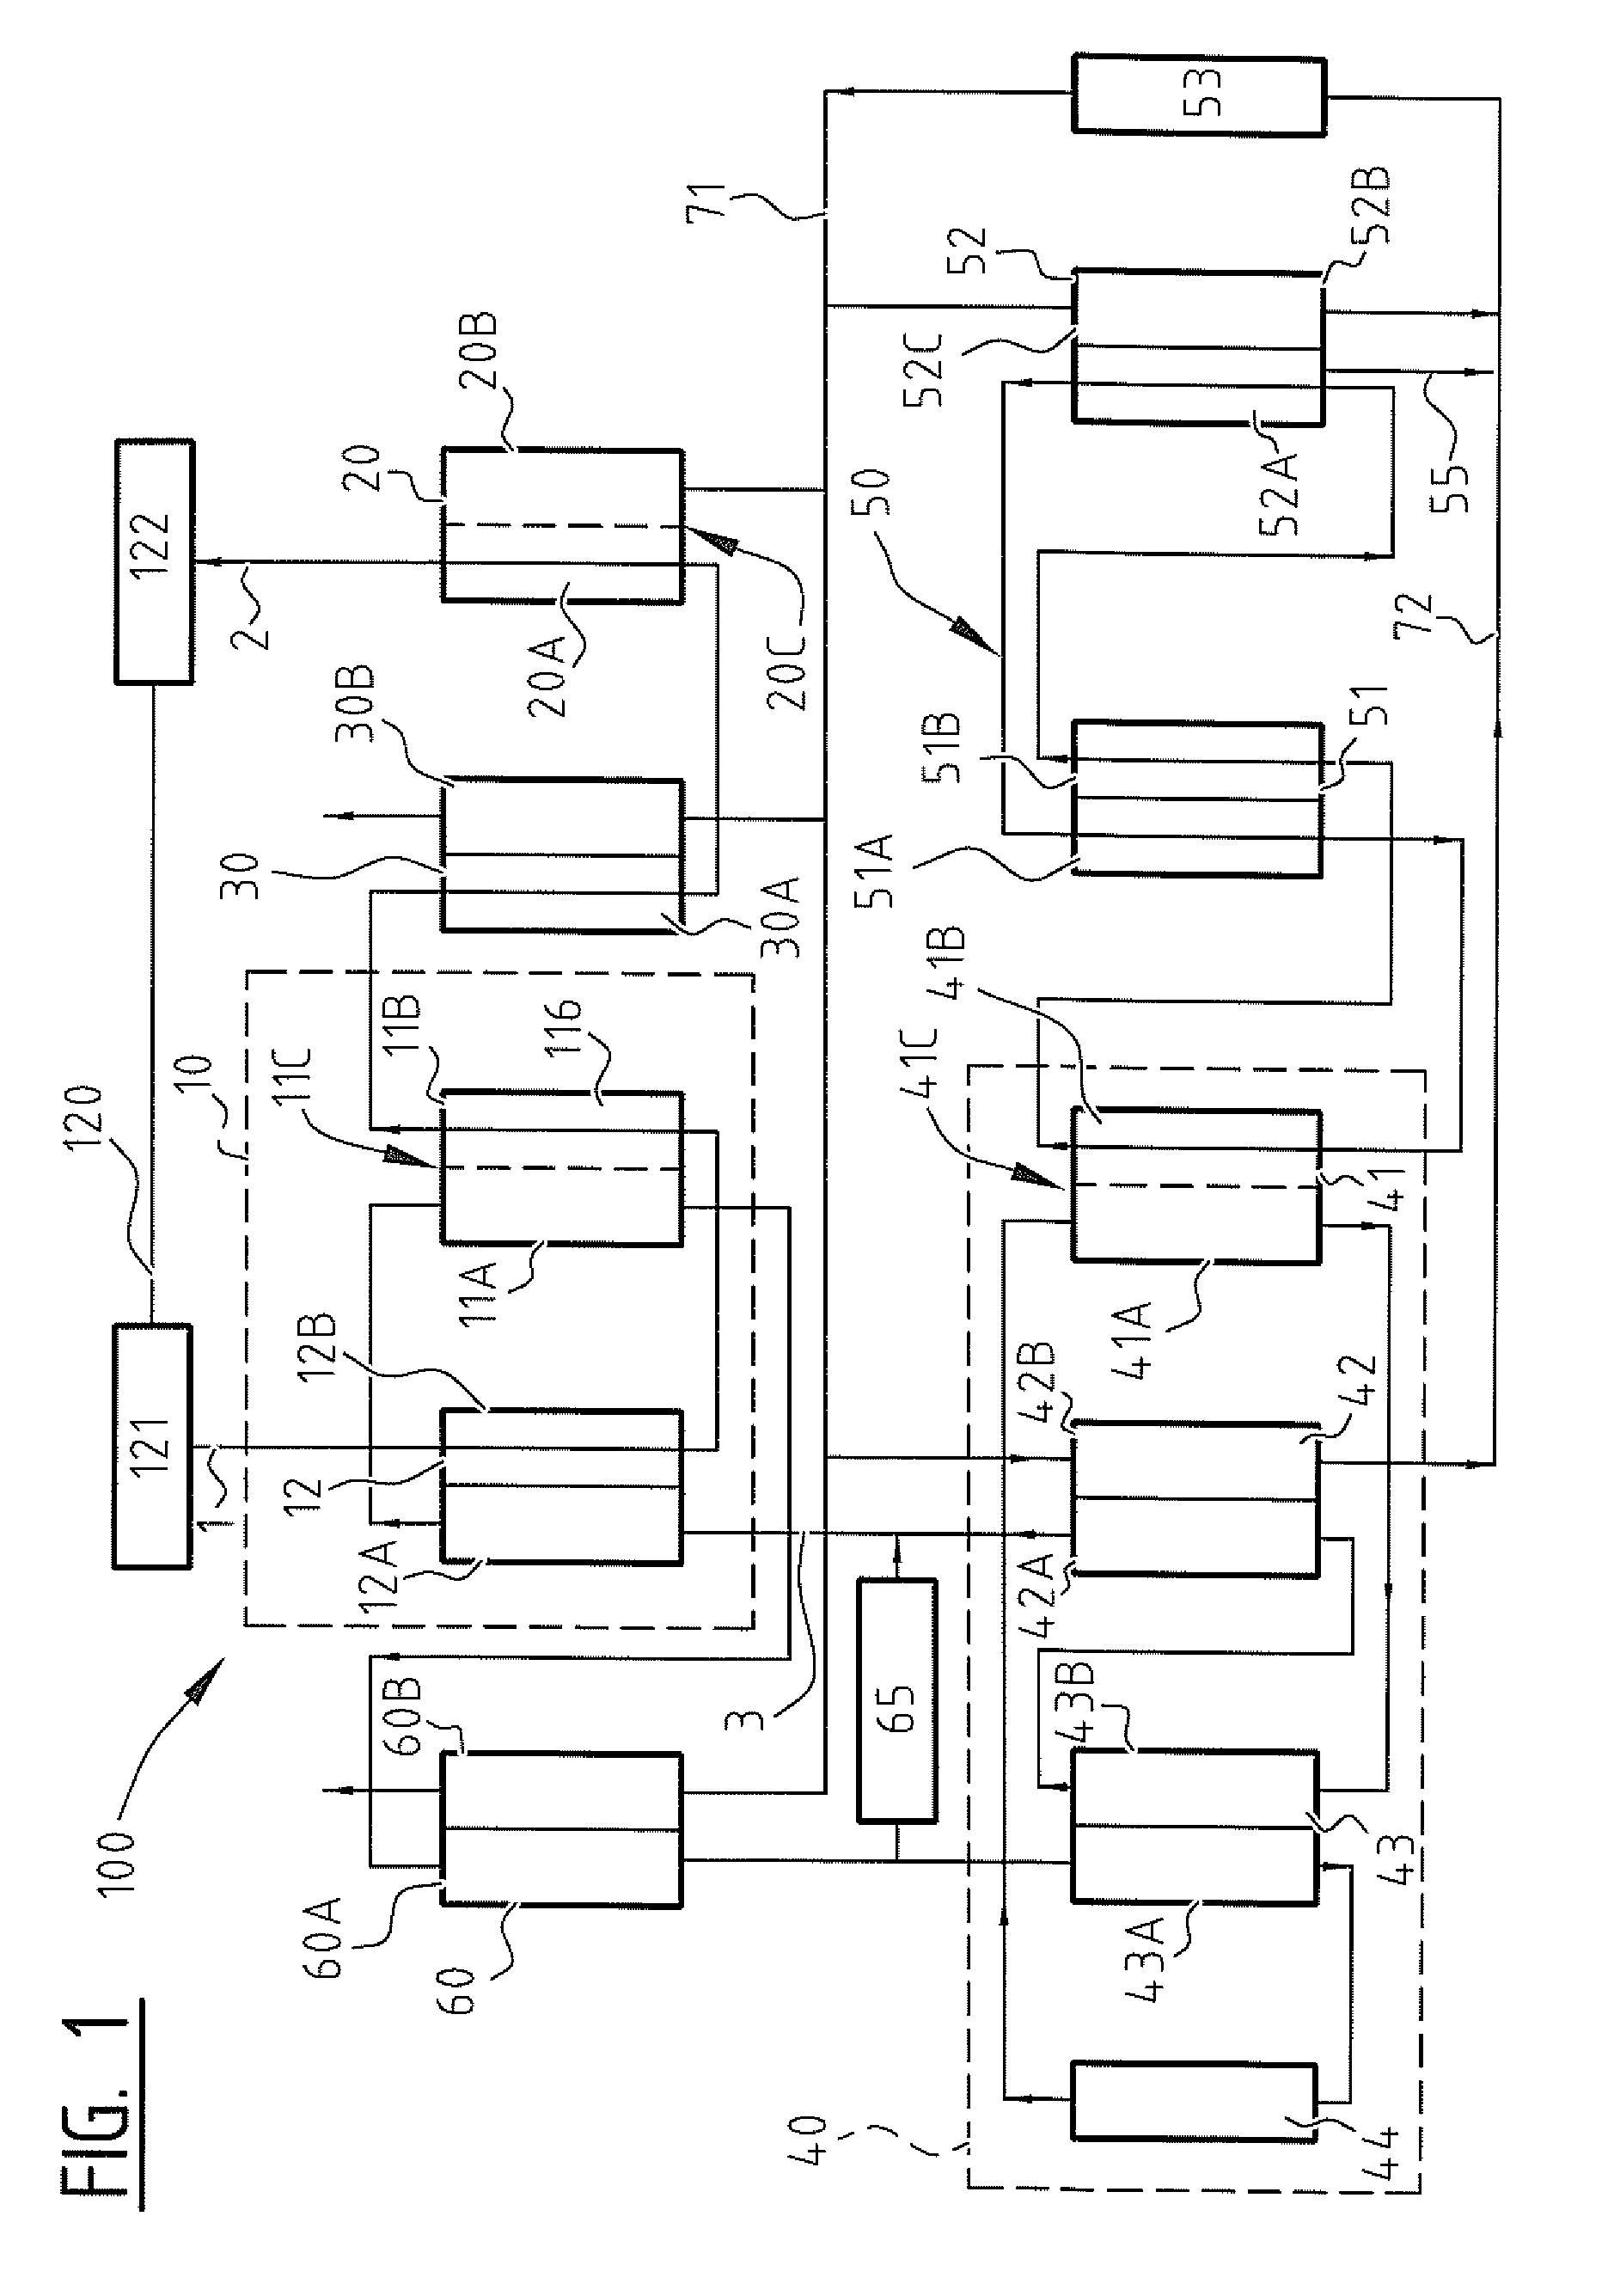 Air-conditioning system and use thereof